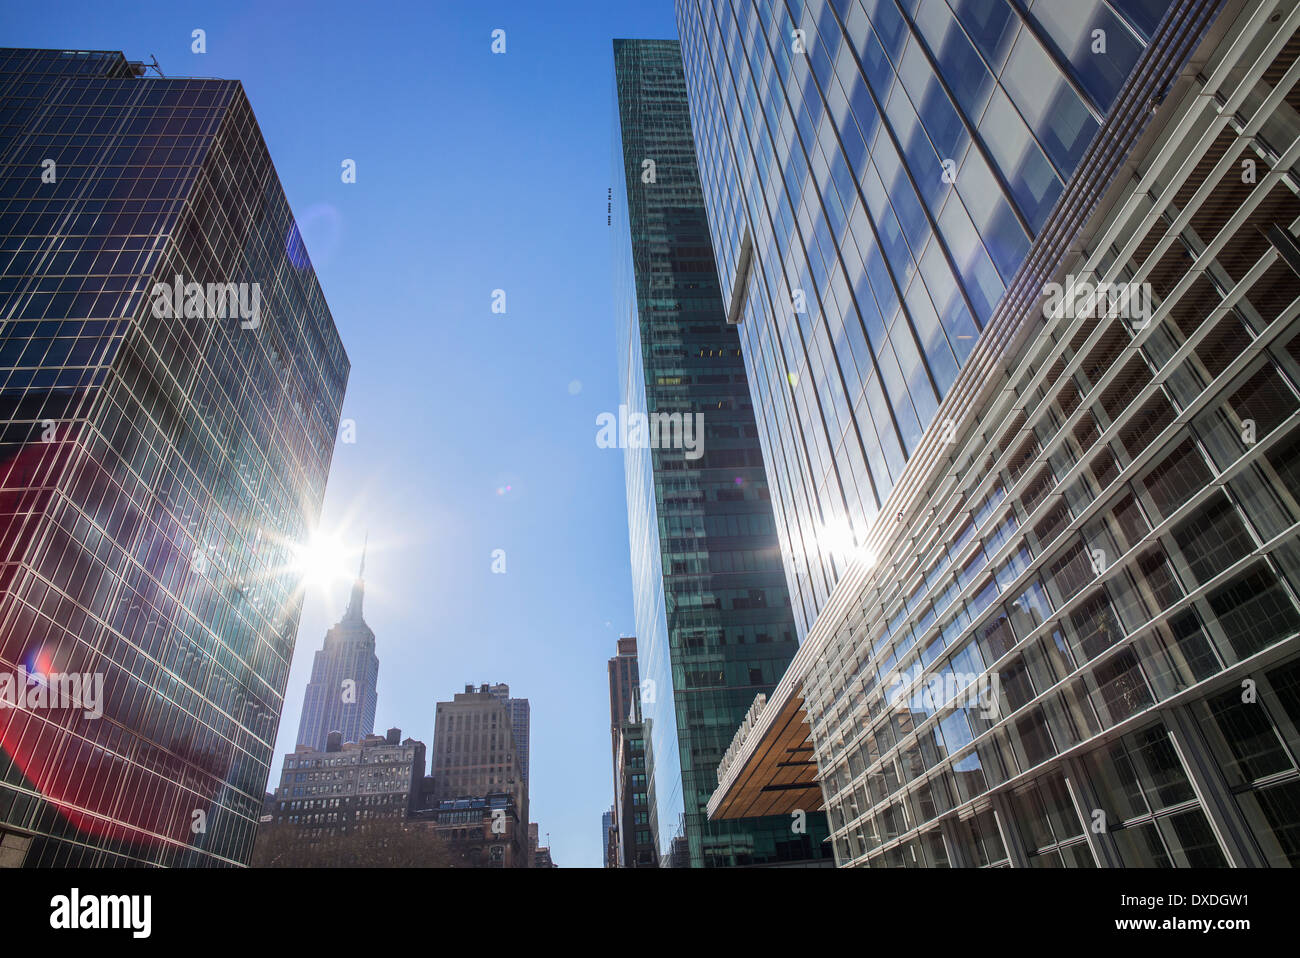 Skyscrapers with solar flare, New York City, USA Stock Photo